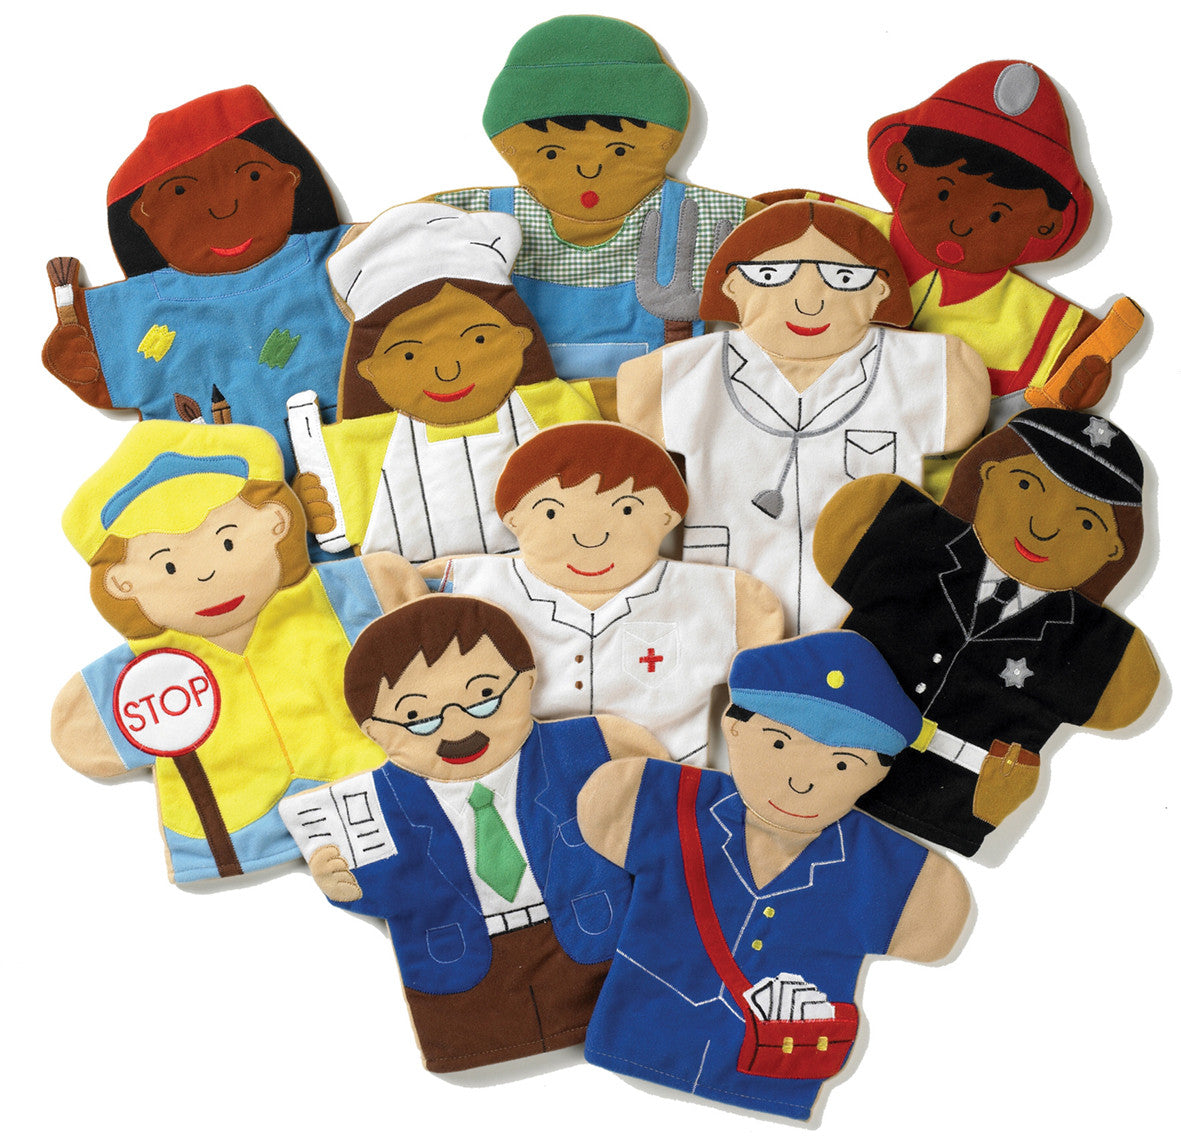 People Who Help Us Hand Puppets pk 10, A set of 10 fabric hand puppets representing people who helps us in the community. Machine washable and can be tumble dried. Beautifully designed fabric hand puppets. Includes teacher, doctor, fire fighter, farmer, etc. Learn about the different roles and create great stories. Pack Size Pack of 10 Dimensions Average size: 25 x 20.5cm, People Who Help Us Hand Puppets pk 10,People who help us puppets,Police puppets,Nurse puppets,role play puppets, 